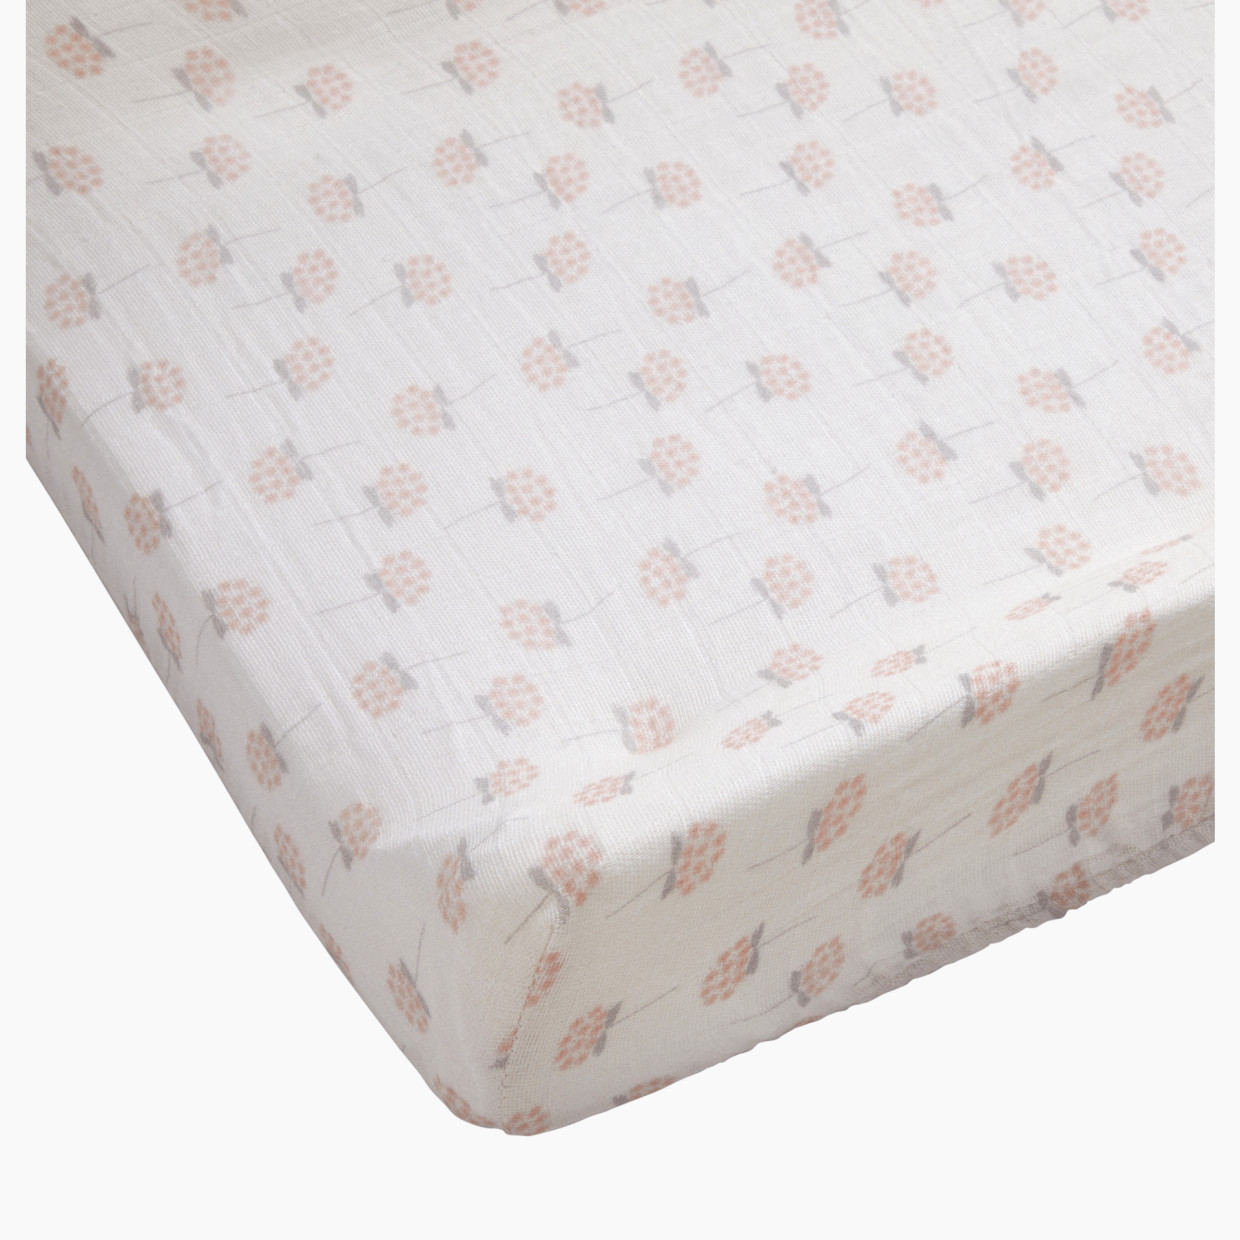 Tiny Kind Muslin Changing Pad Cover - Floral Bunch.